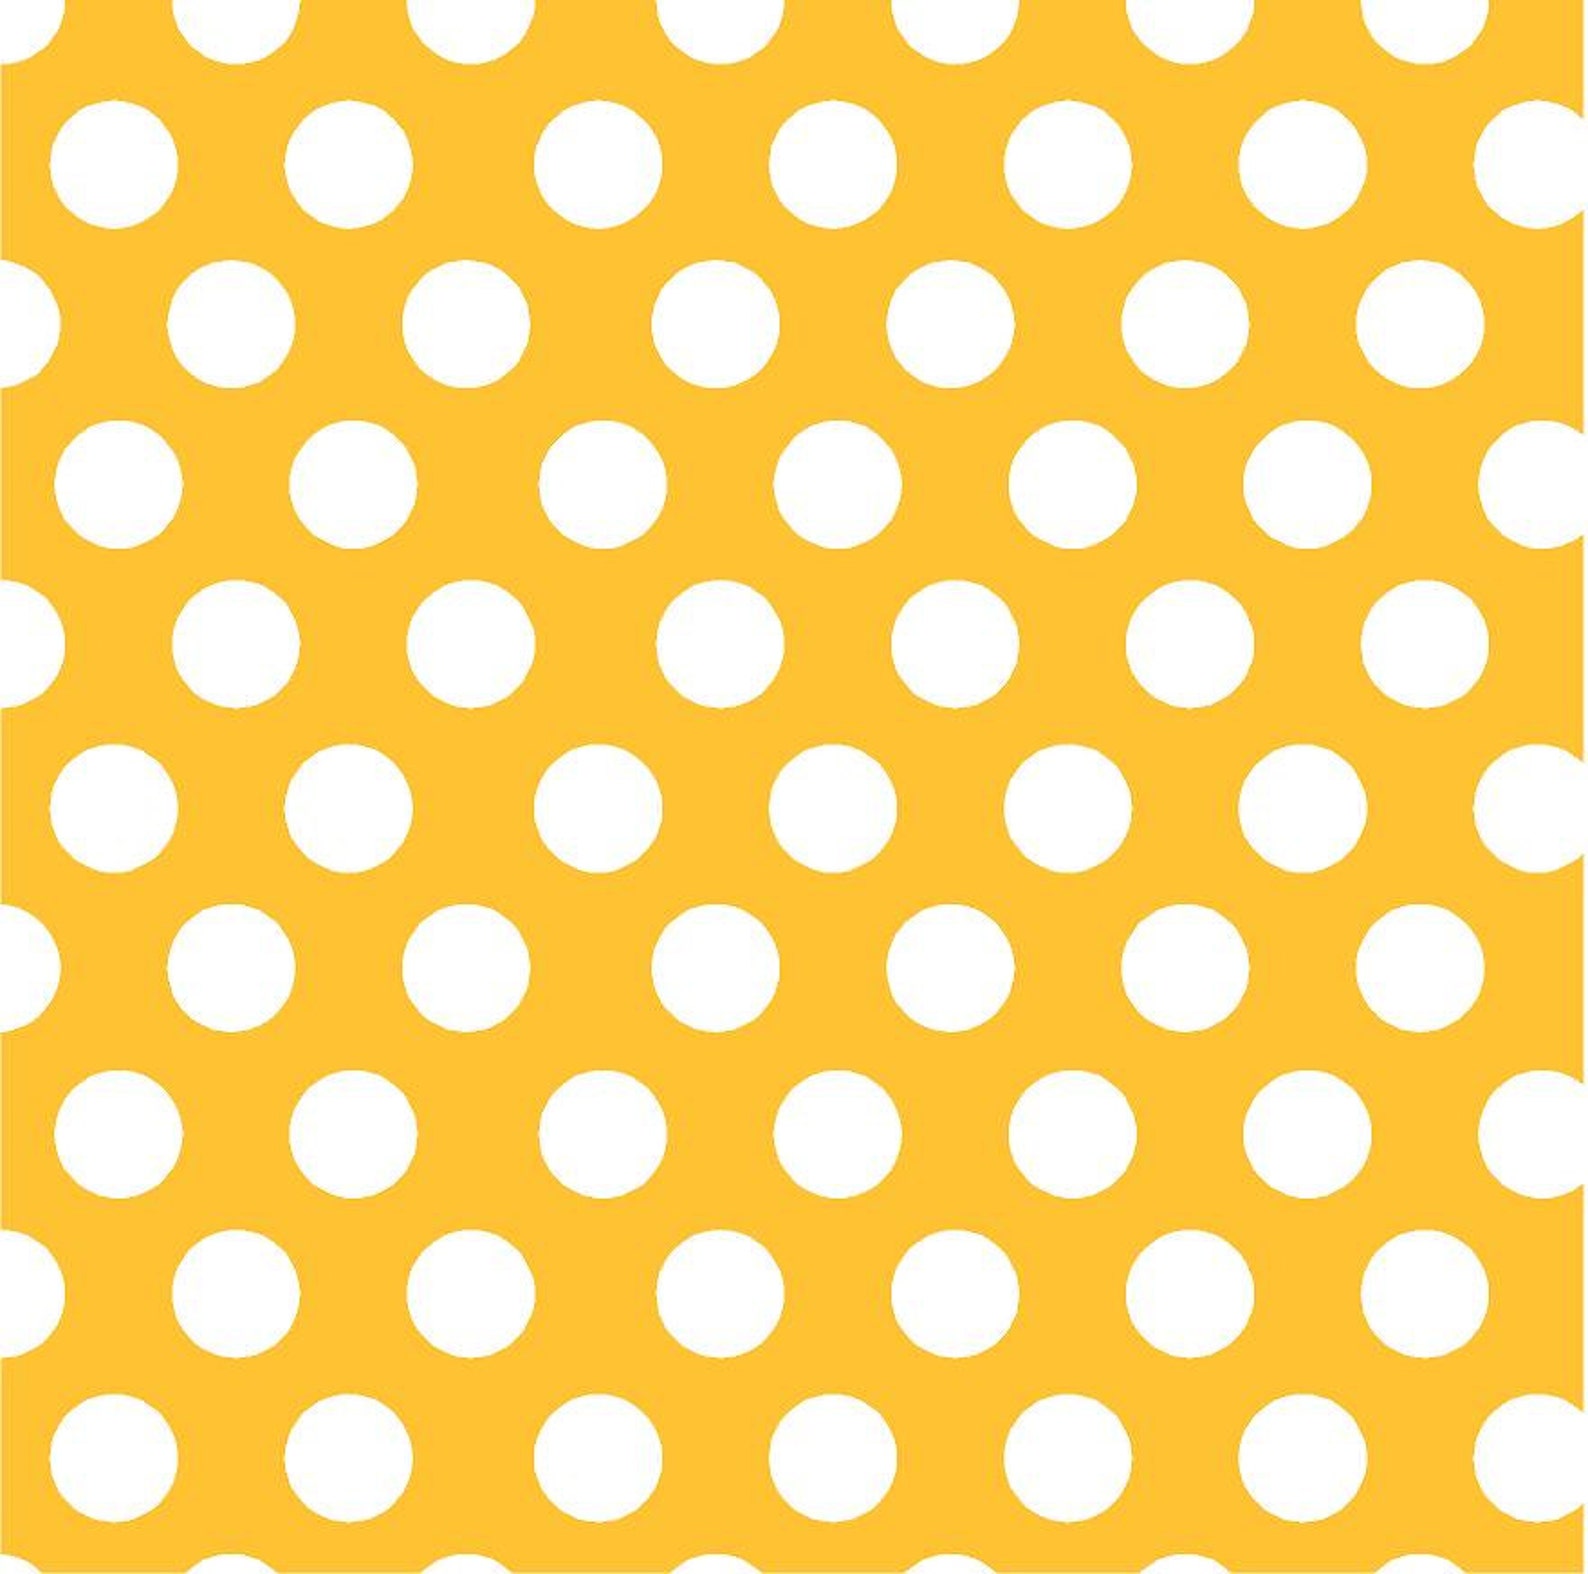 Patterned Vinyl Yellow Gold With White Polka Dots Craft Vinyl - Etsy